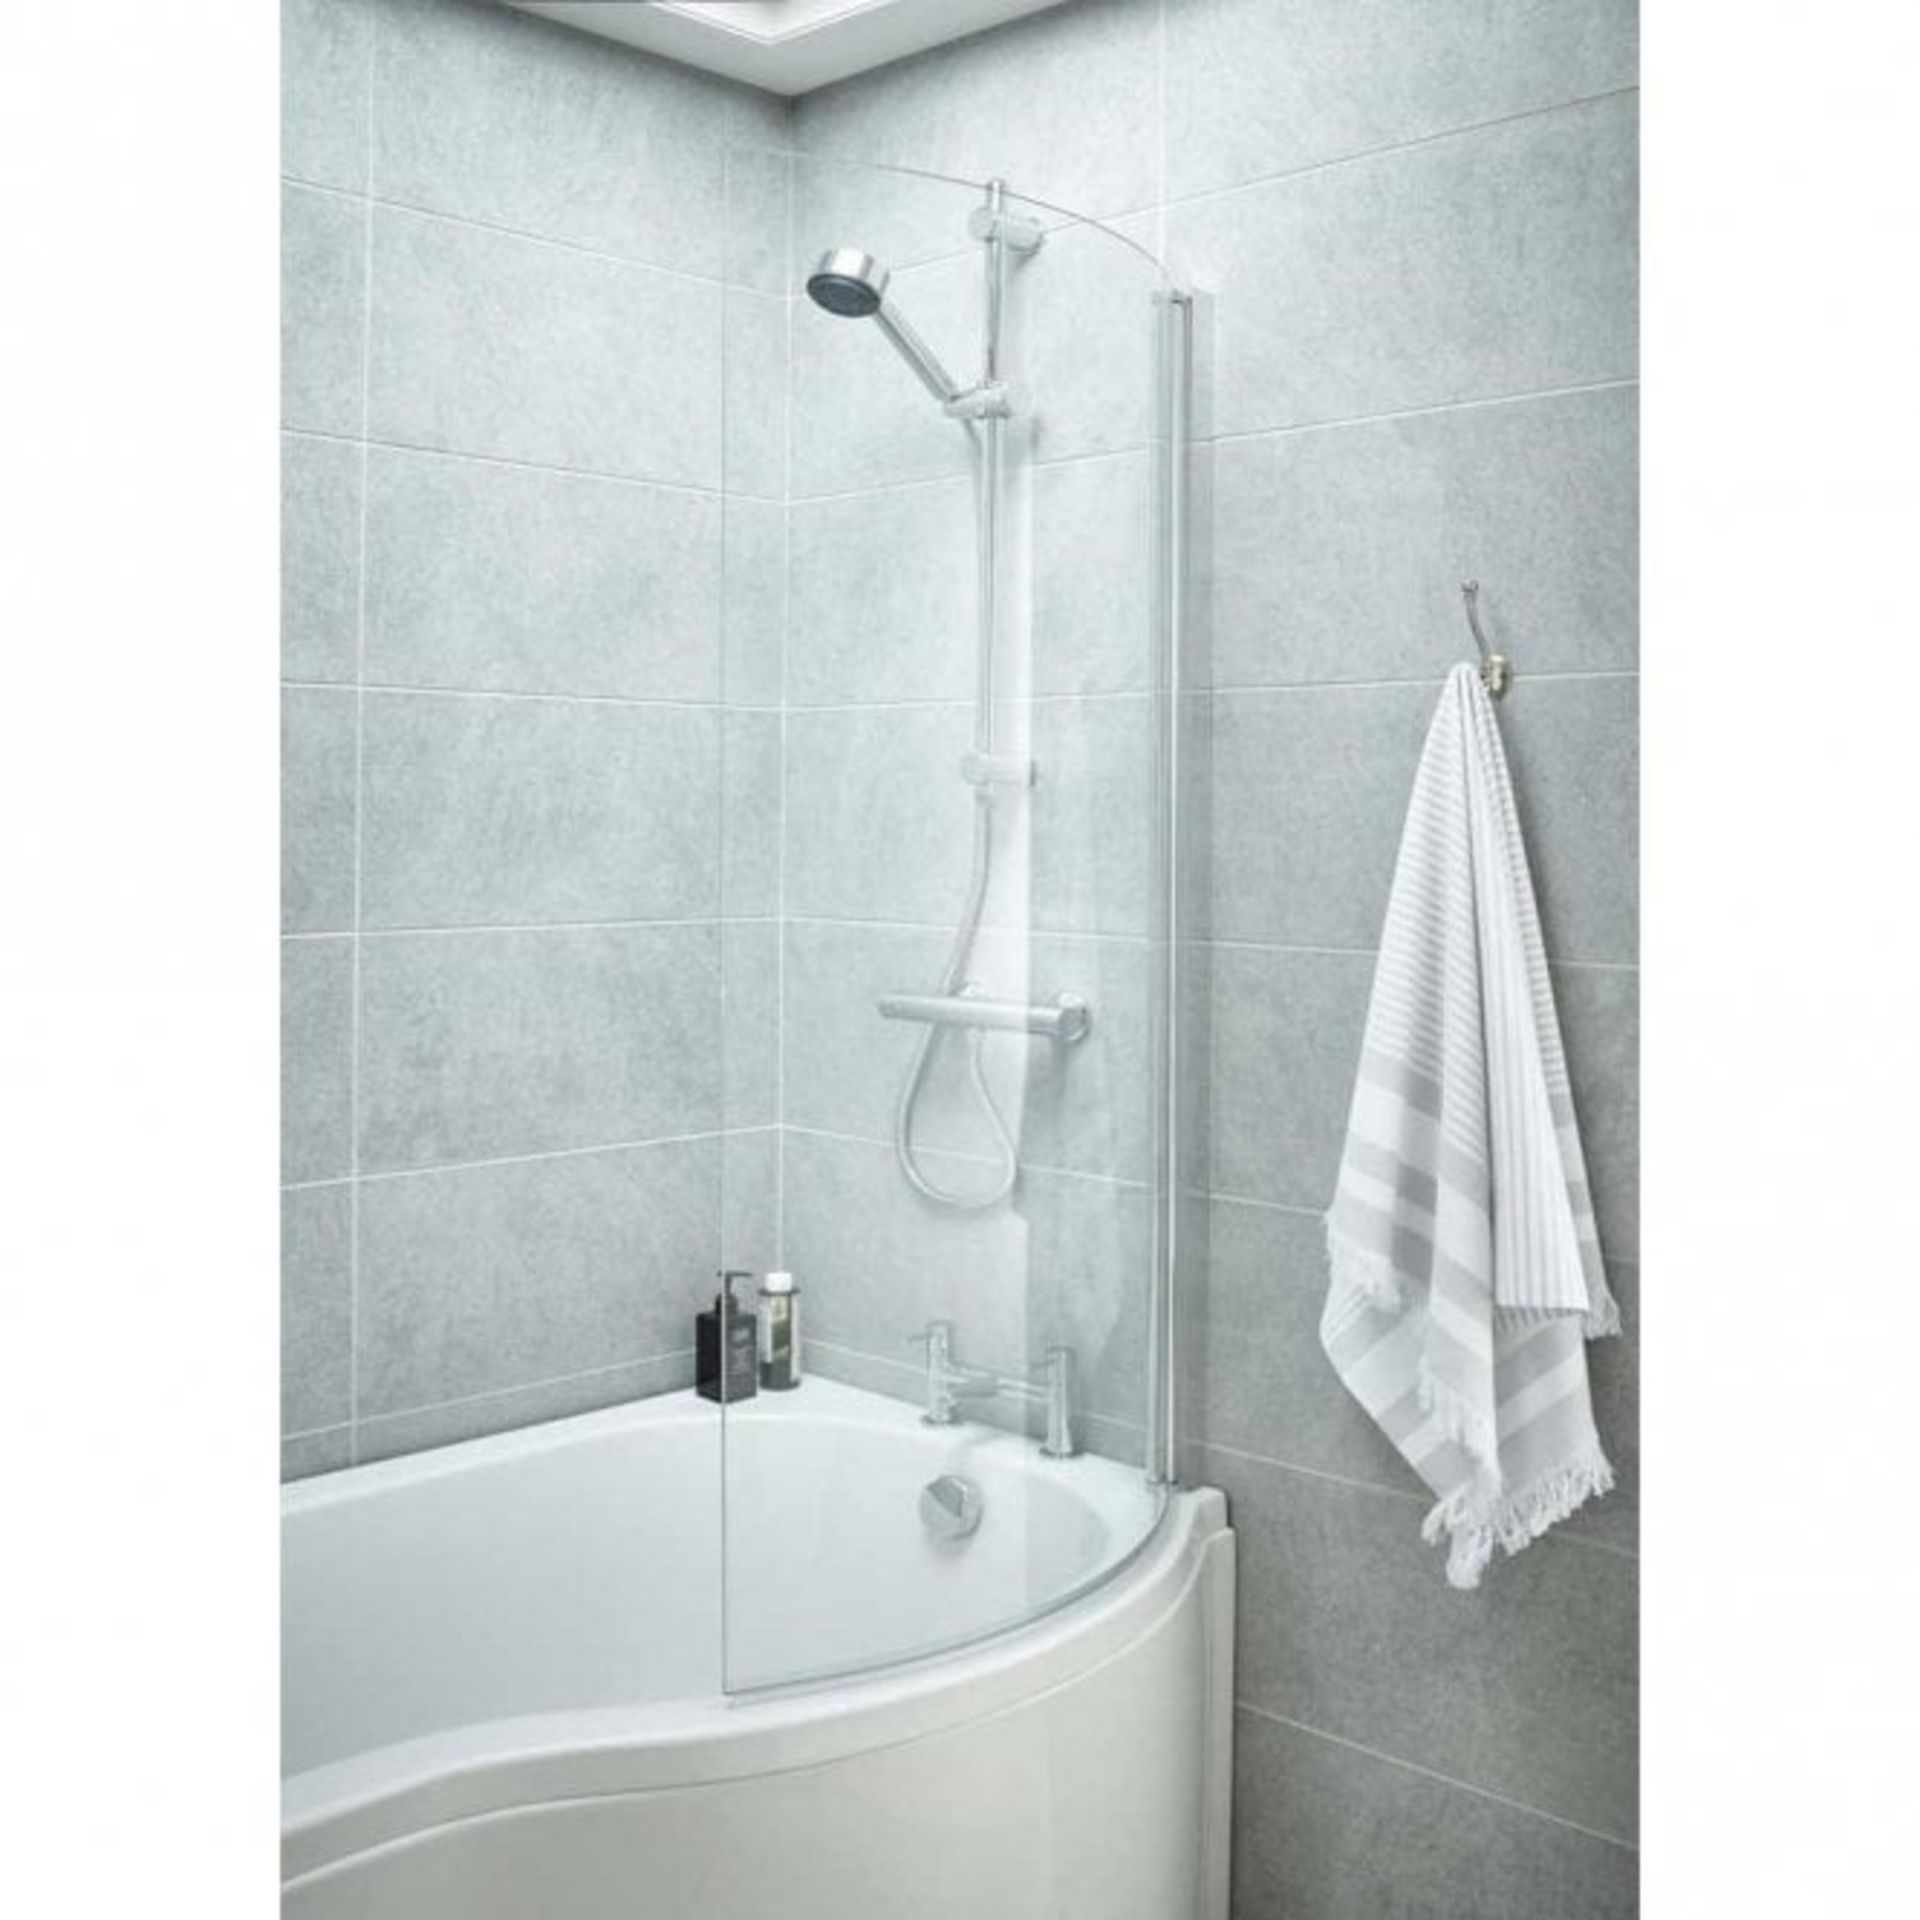 NEW (Z30) Curved P-Bath Screen. RRP £168.00. This screen is made of 6mm toughened safety glass Every